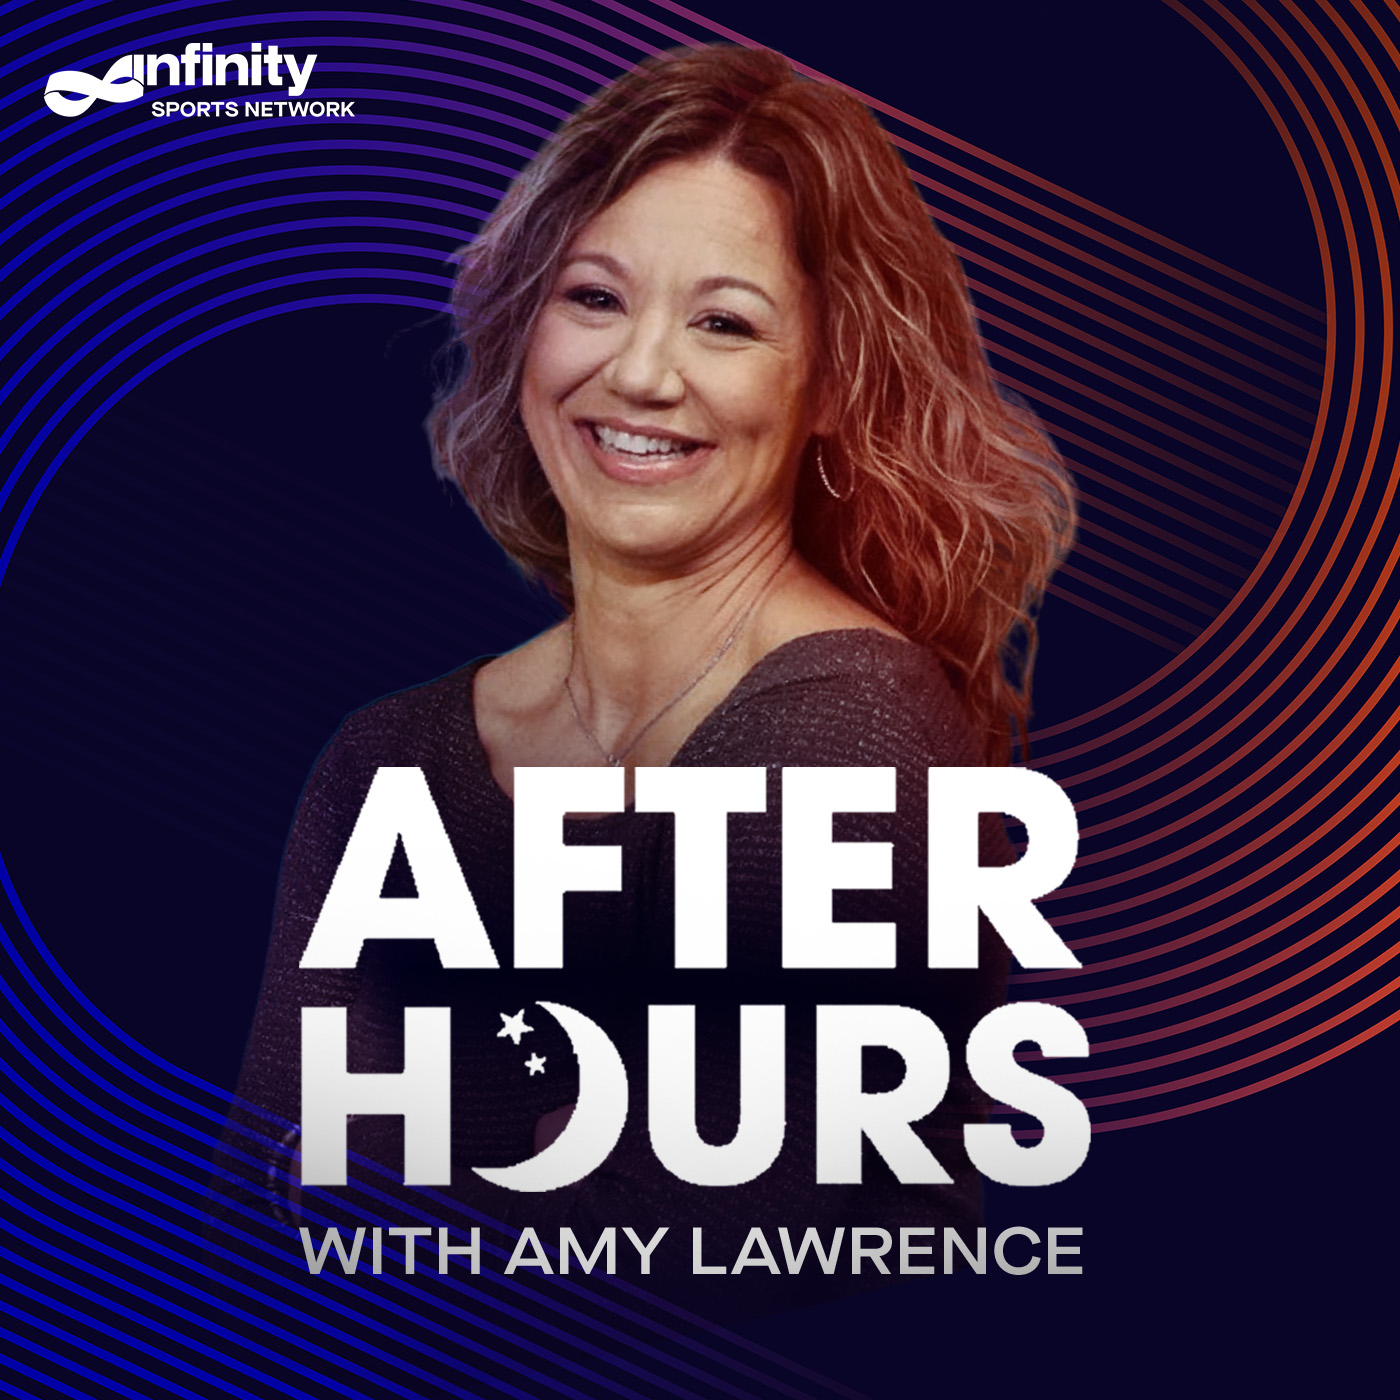 2-16-22 After Hours with Amy Lawrence PODCAST: Hour 1